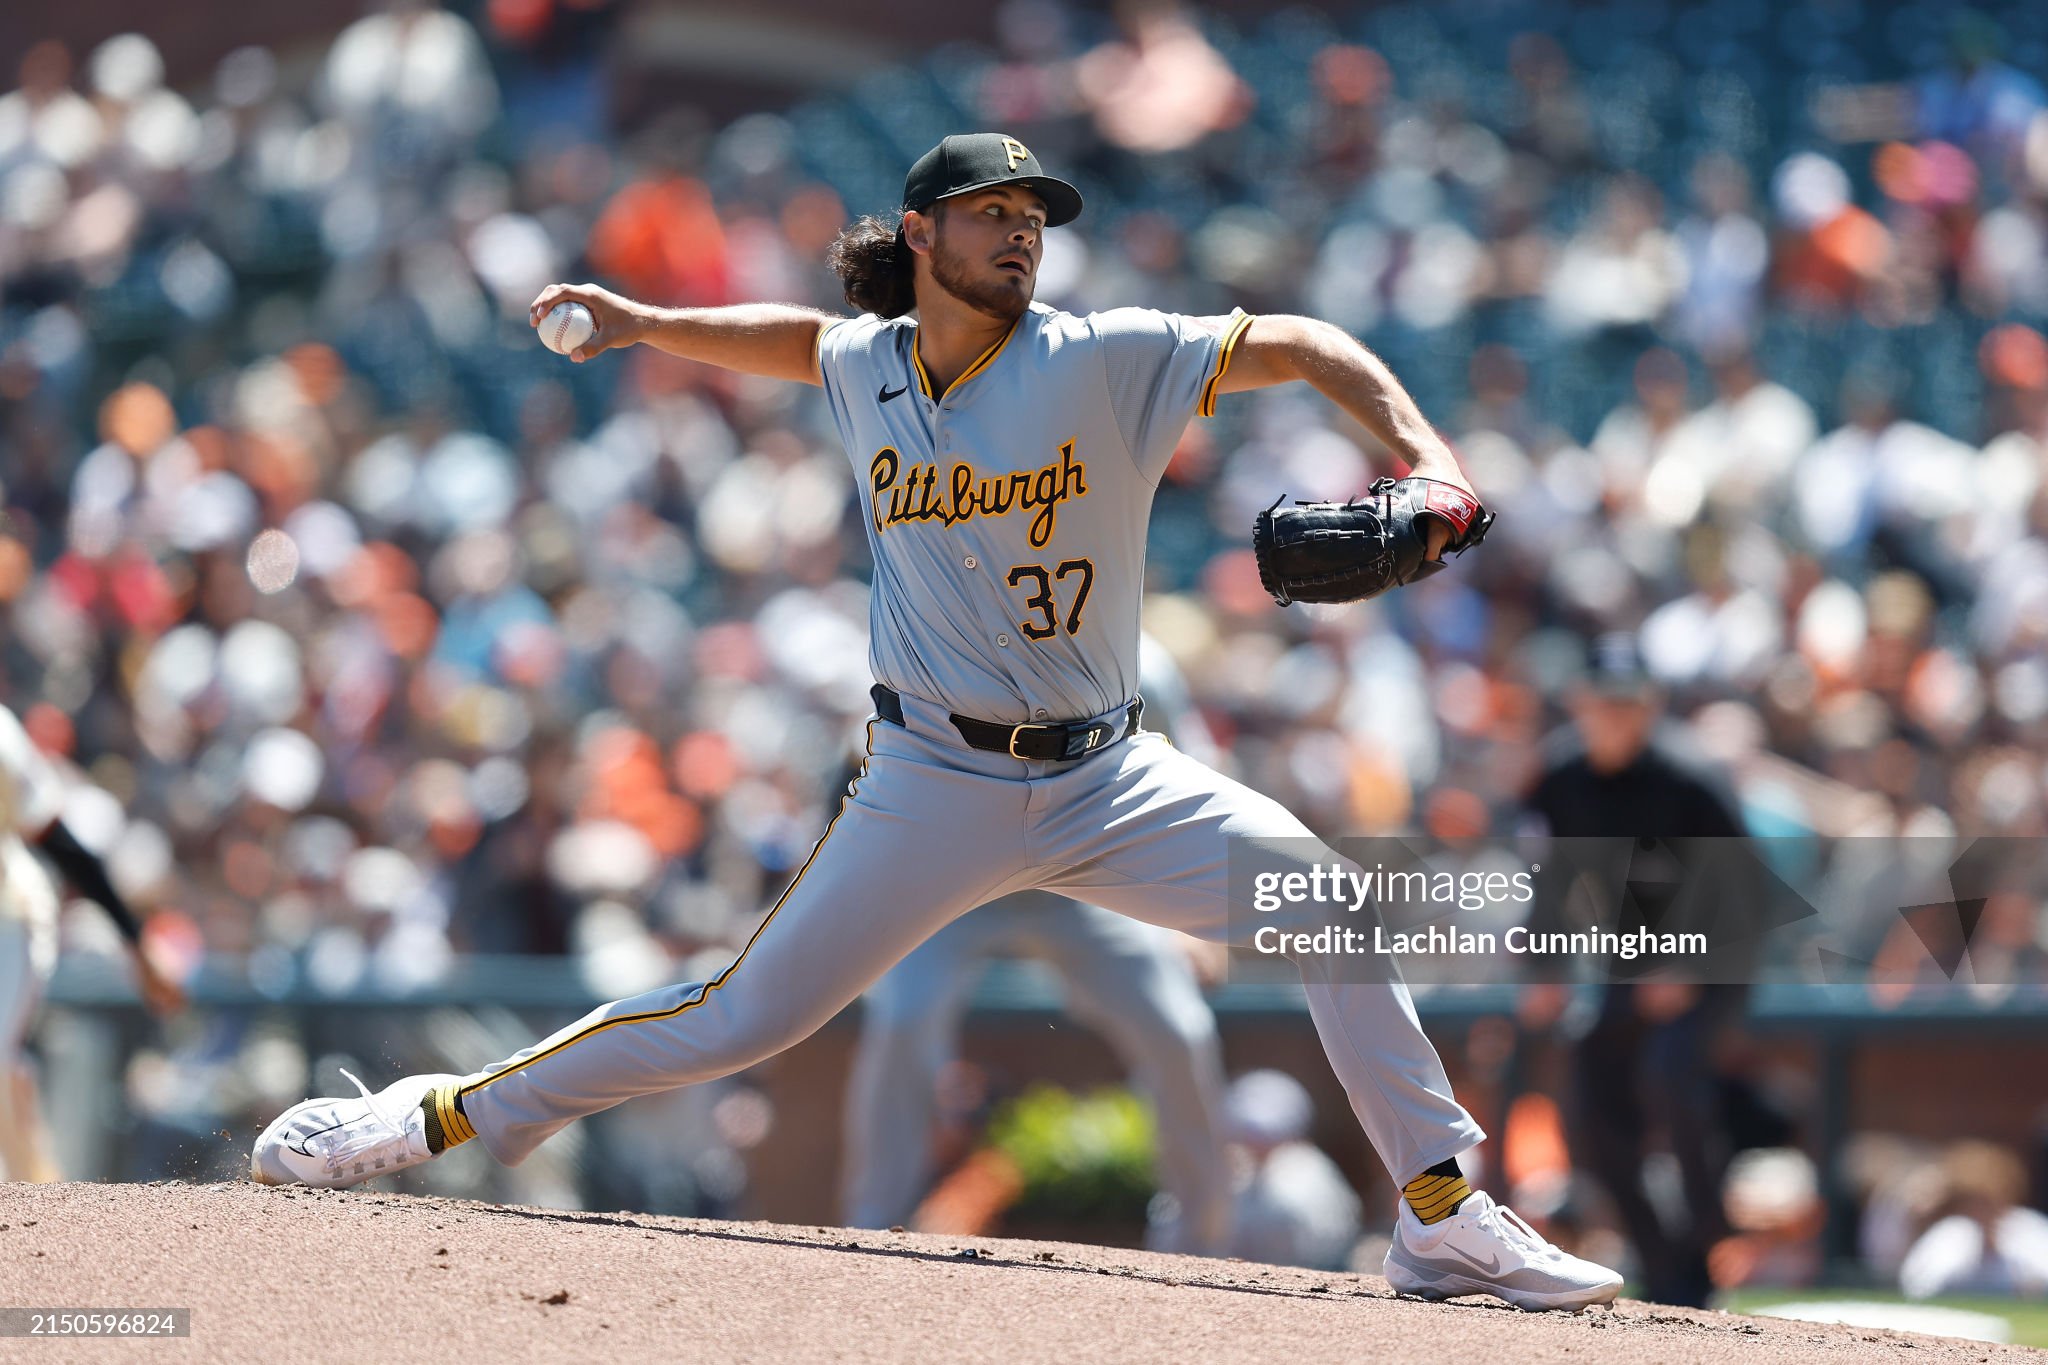 Pirates Drop Series to Giants, Head Across the Bay to Oakland